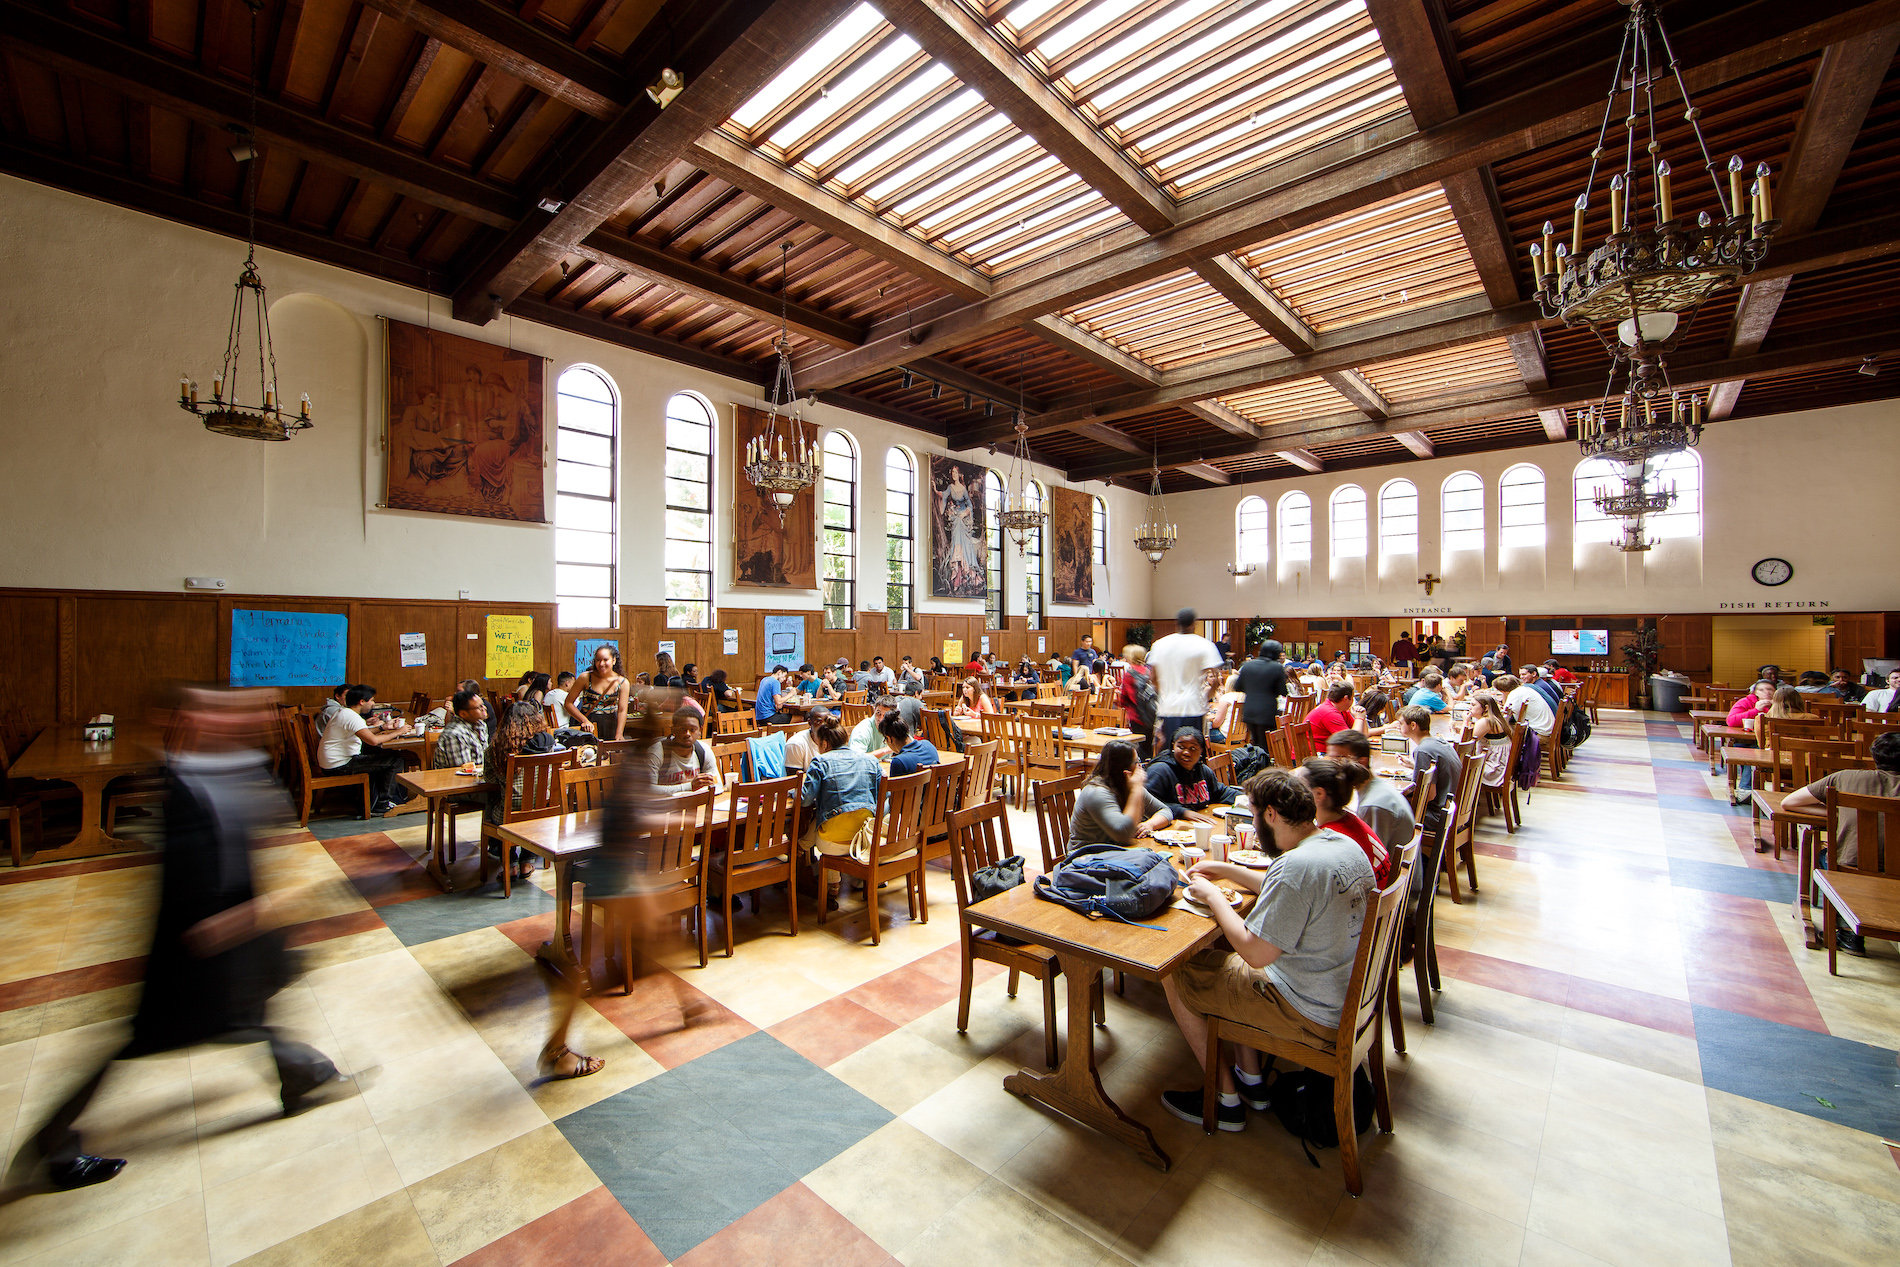 Students in Oliver Hall in September 2022